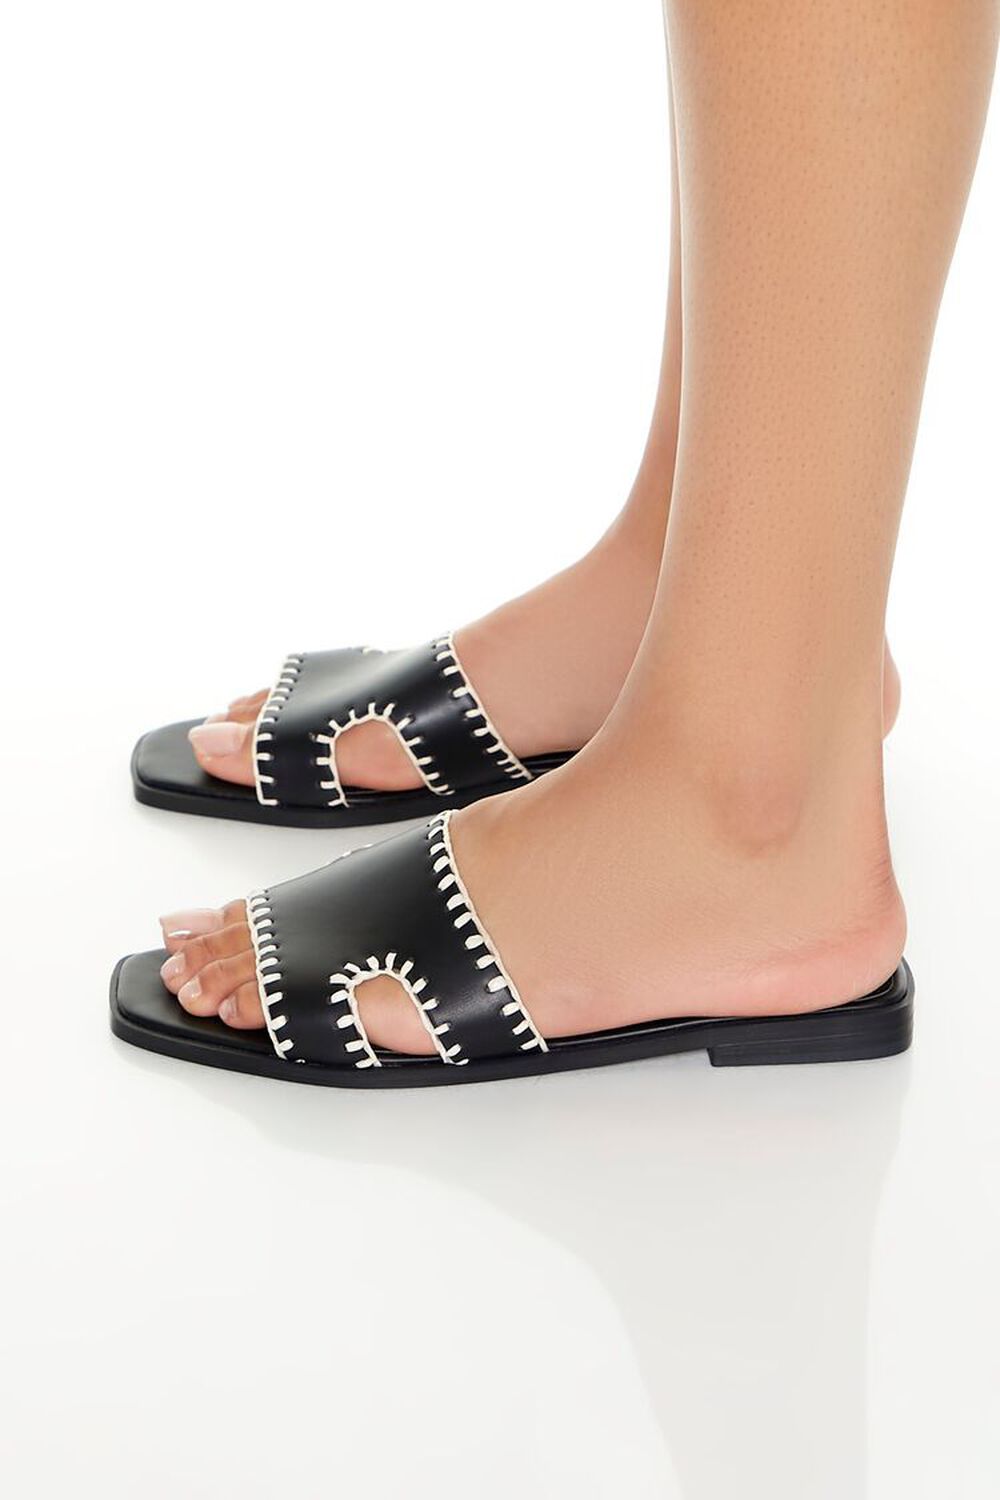 BLACK Embroidered Faux Leather Sandals, image 2